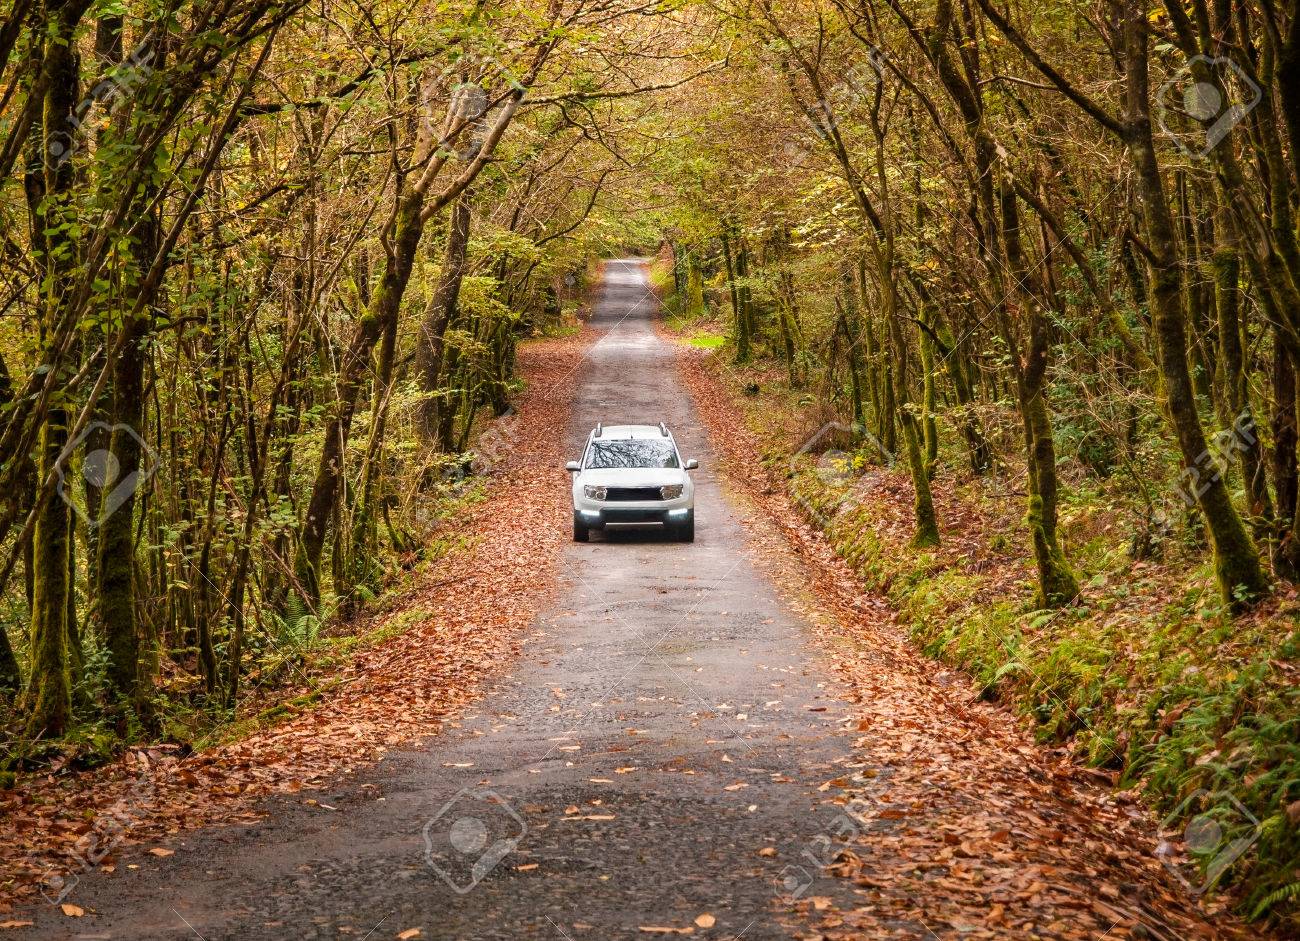 24158618-Car-on-a-road-in-the-forest-in-autumn--Stock-Photo.jpg